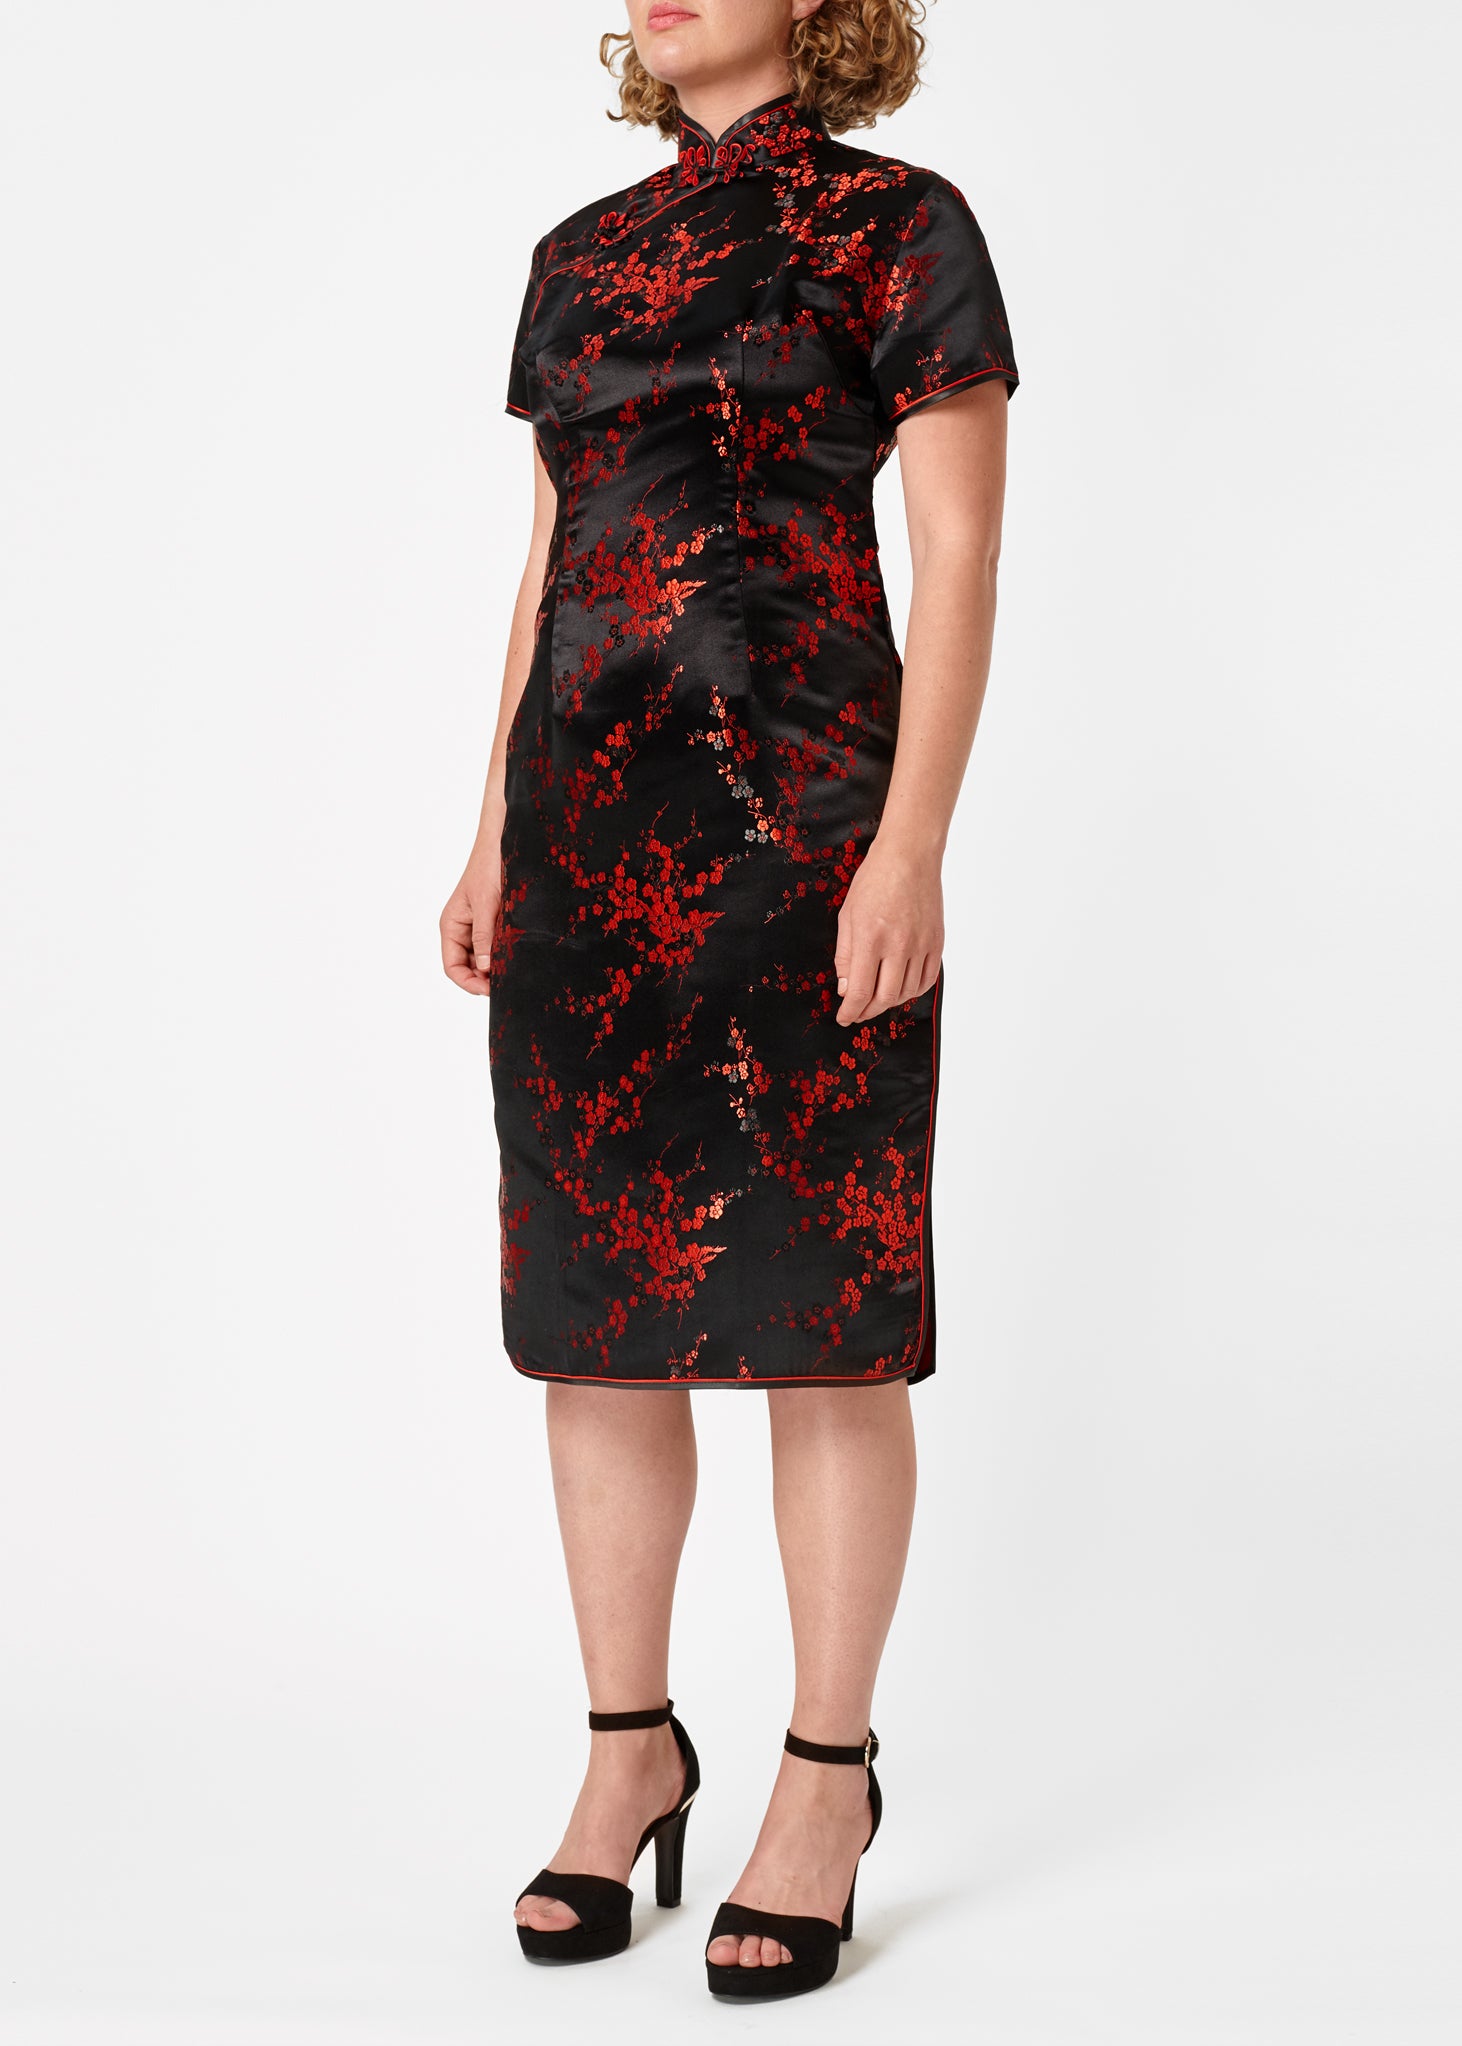 The Cheongsam or Qipao, is a feminine body-hugging dress with distinctive Chinese features of mandarin collar, side splits and hand stitched flower and knot frog fastenings. Manufactured in authentic high quality silk/rayon brocade in black with red cherry blossom design - a symbol of female beauty and love.